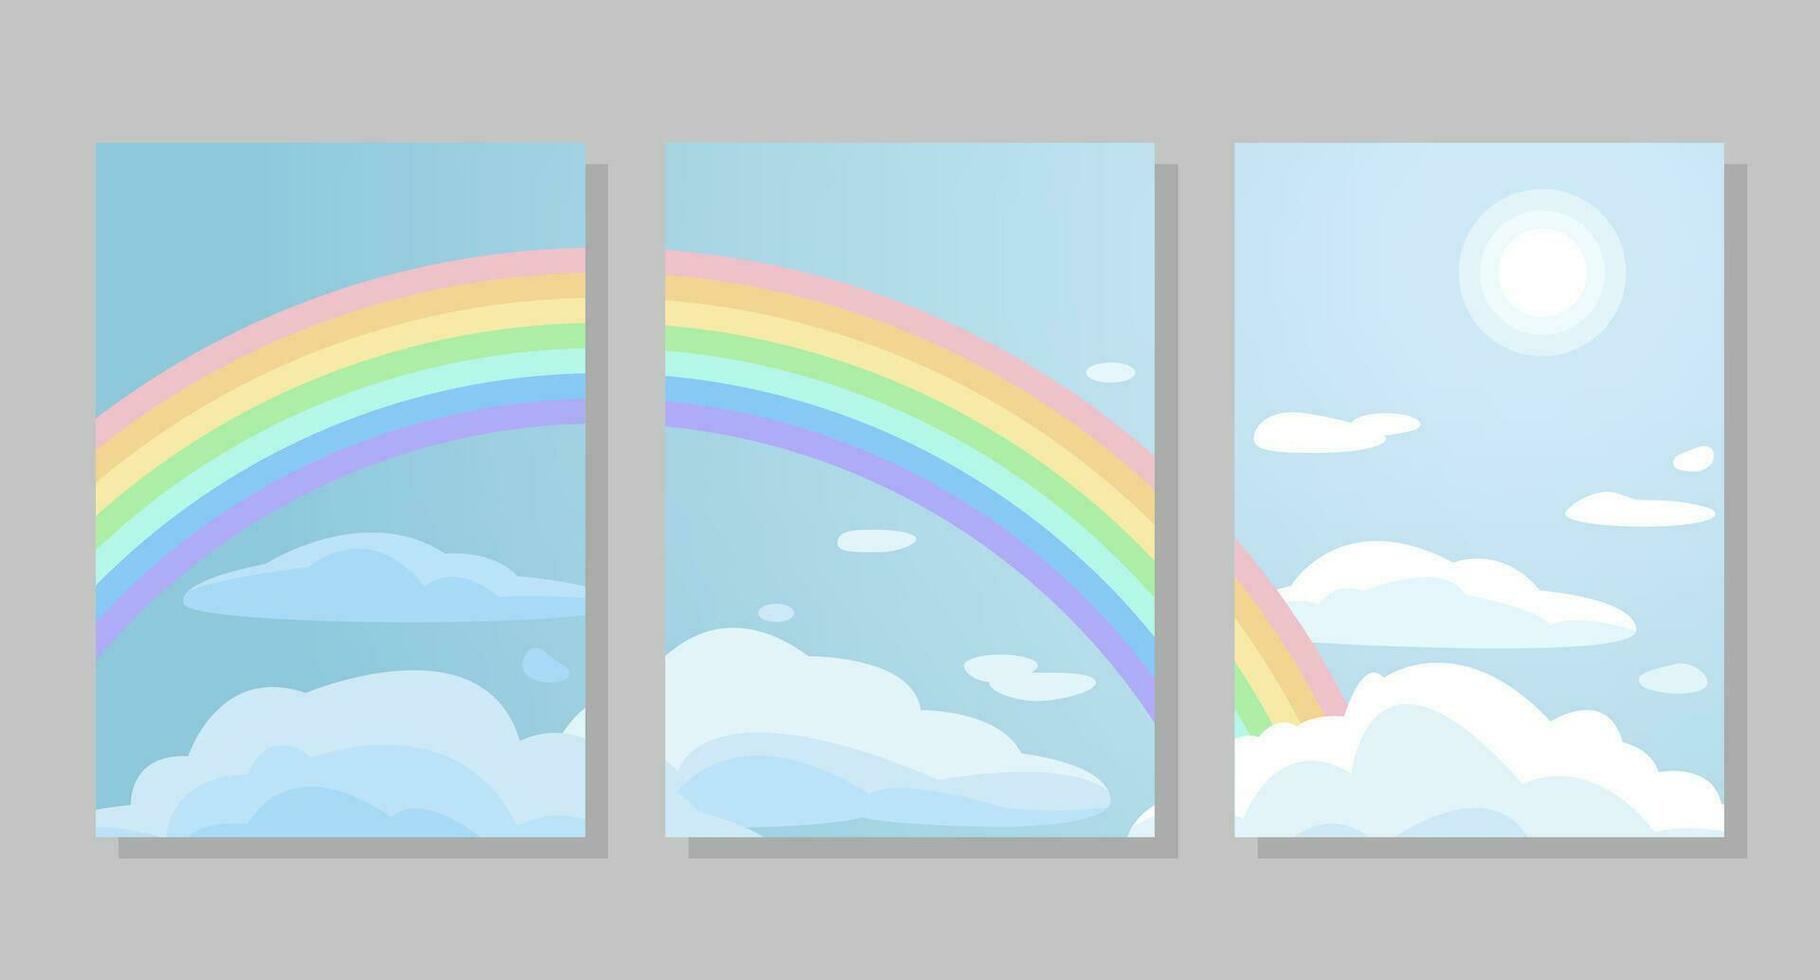 Set of sky background, frames. Rainbow, sun and clouds. Vector illustration. Social media banner template for stories, posts, blogs, cards, invitations.